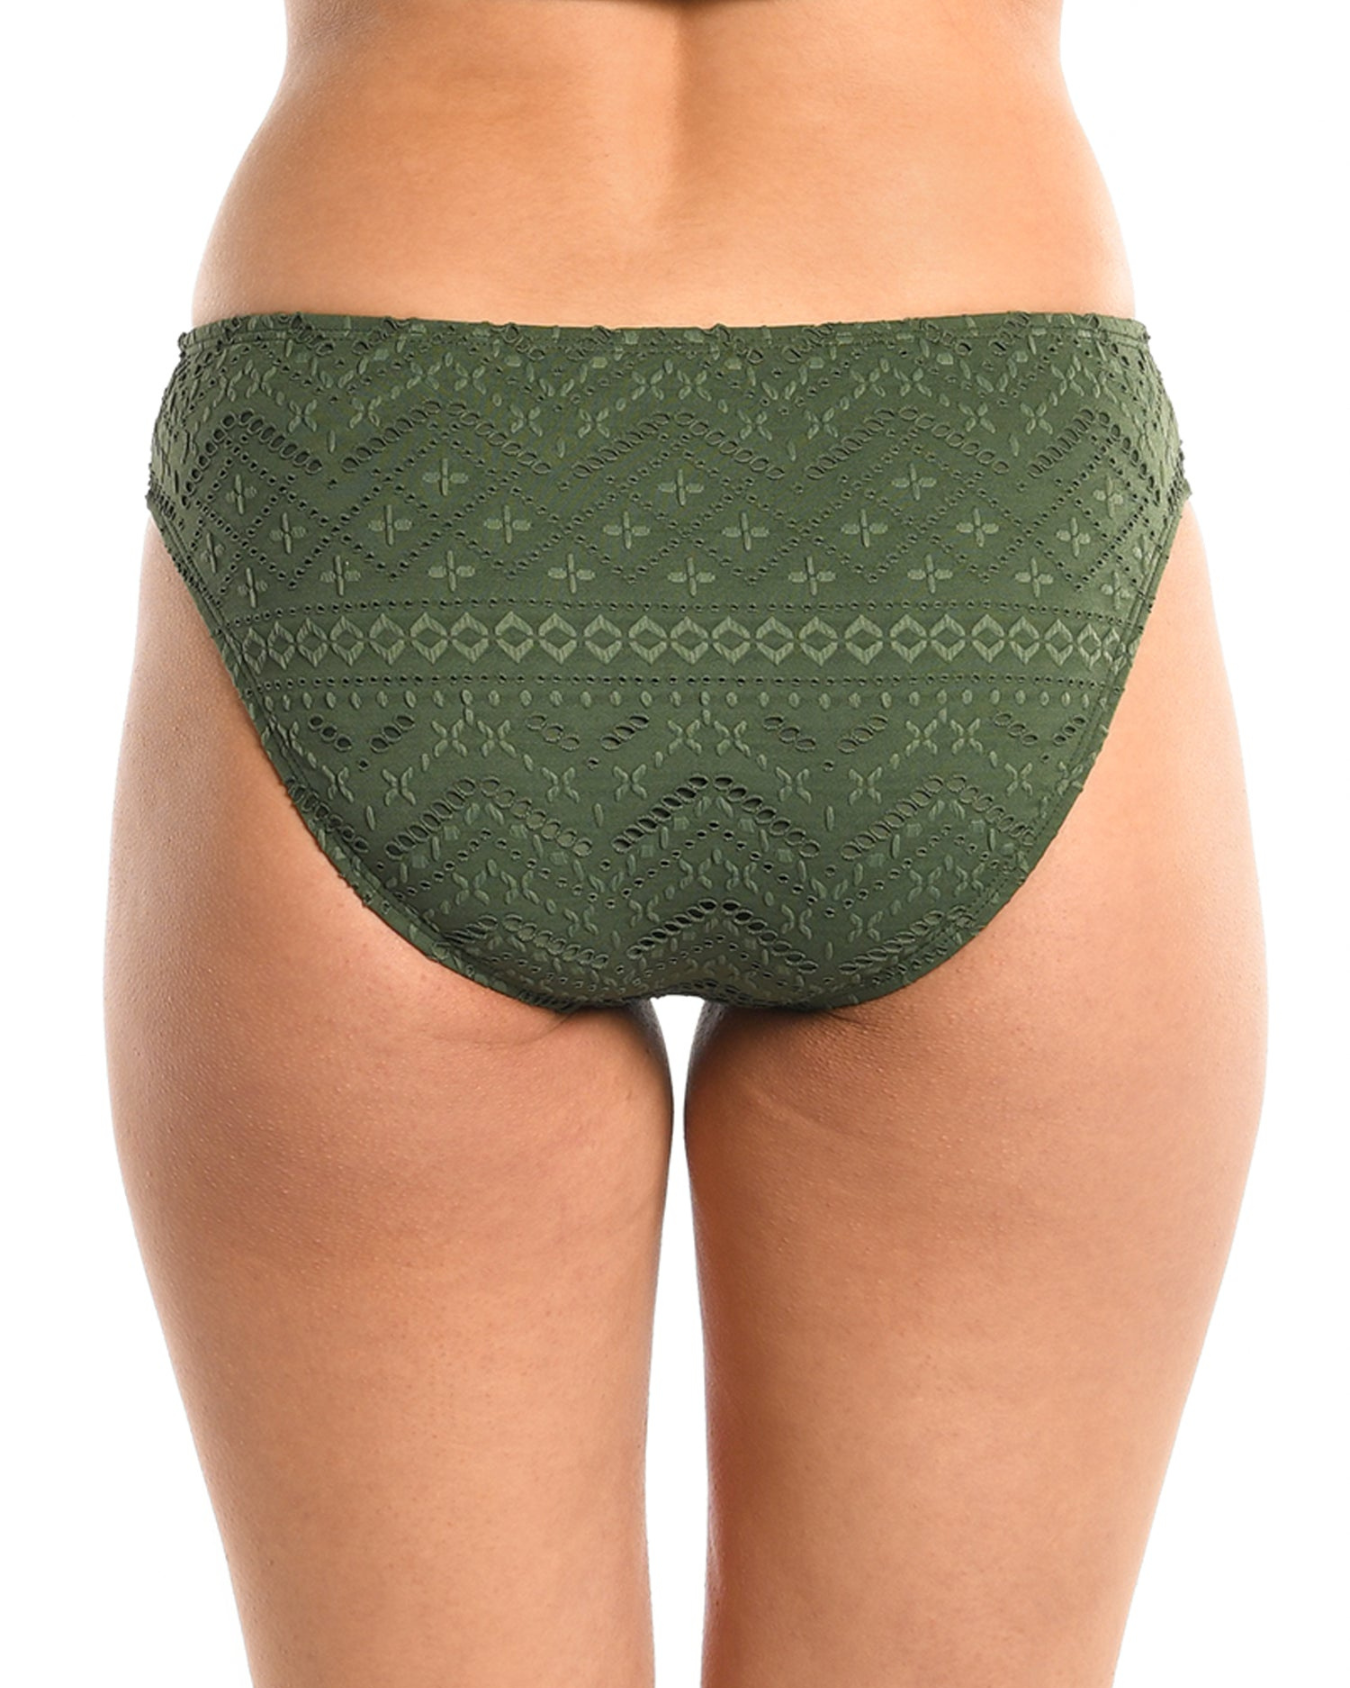 Model wearing a hipster bottom in forest green